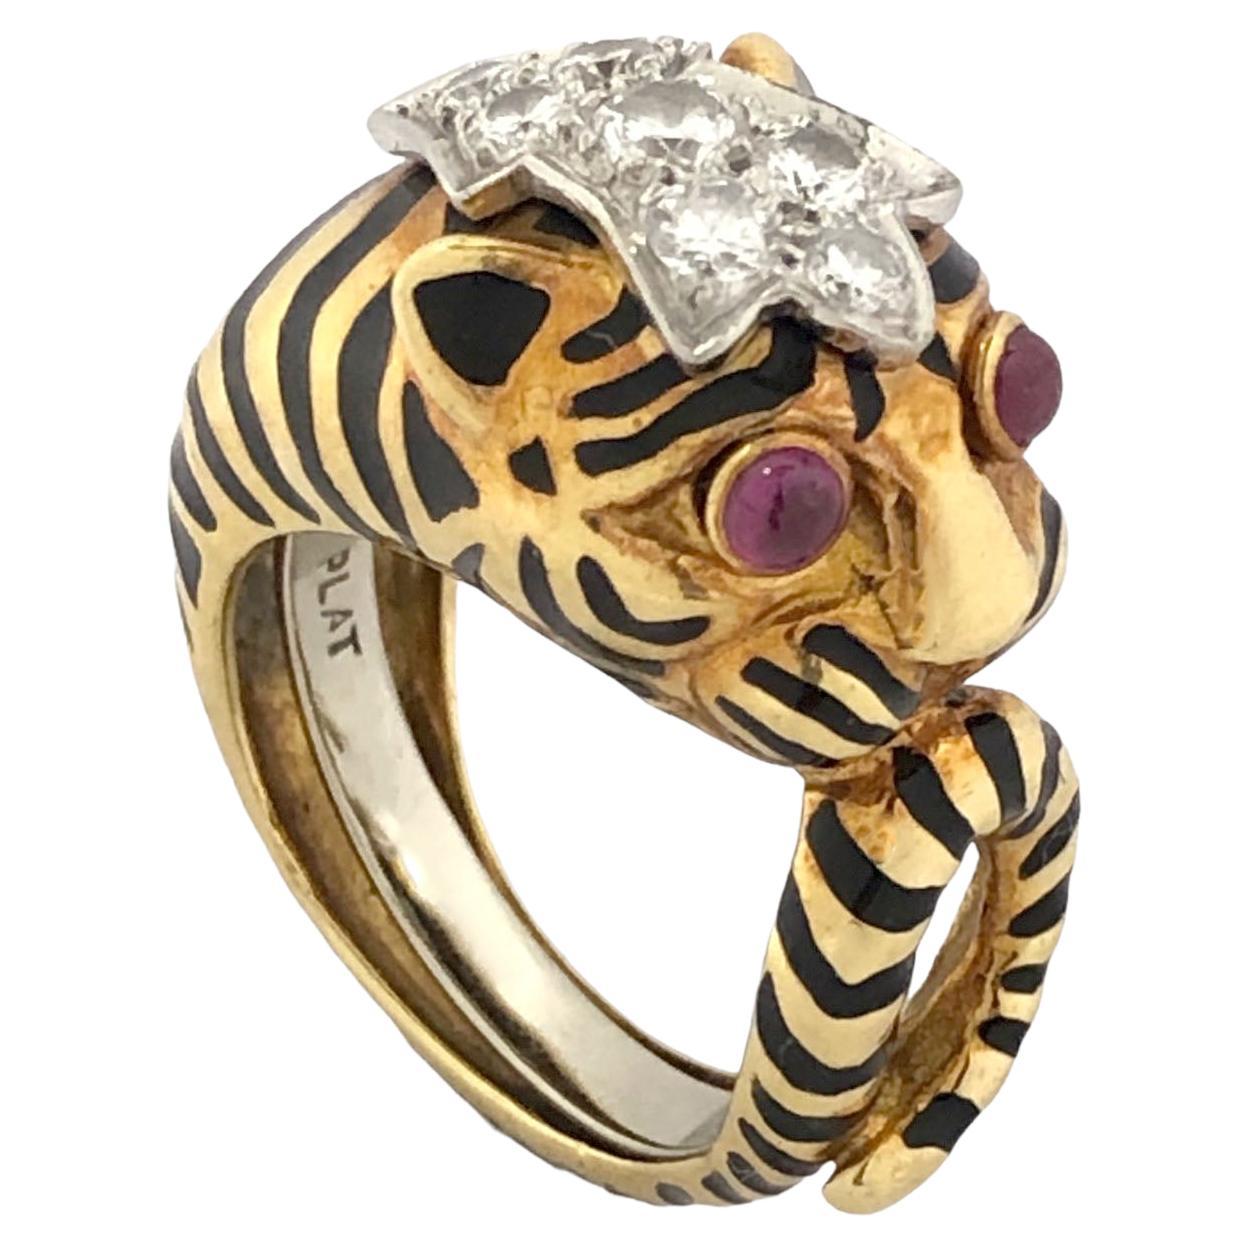 NEW! Year of the Tiger ring, tiger ring, brass tiger ring